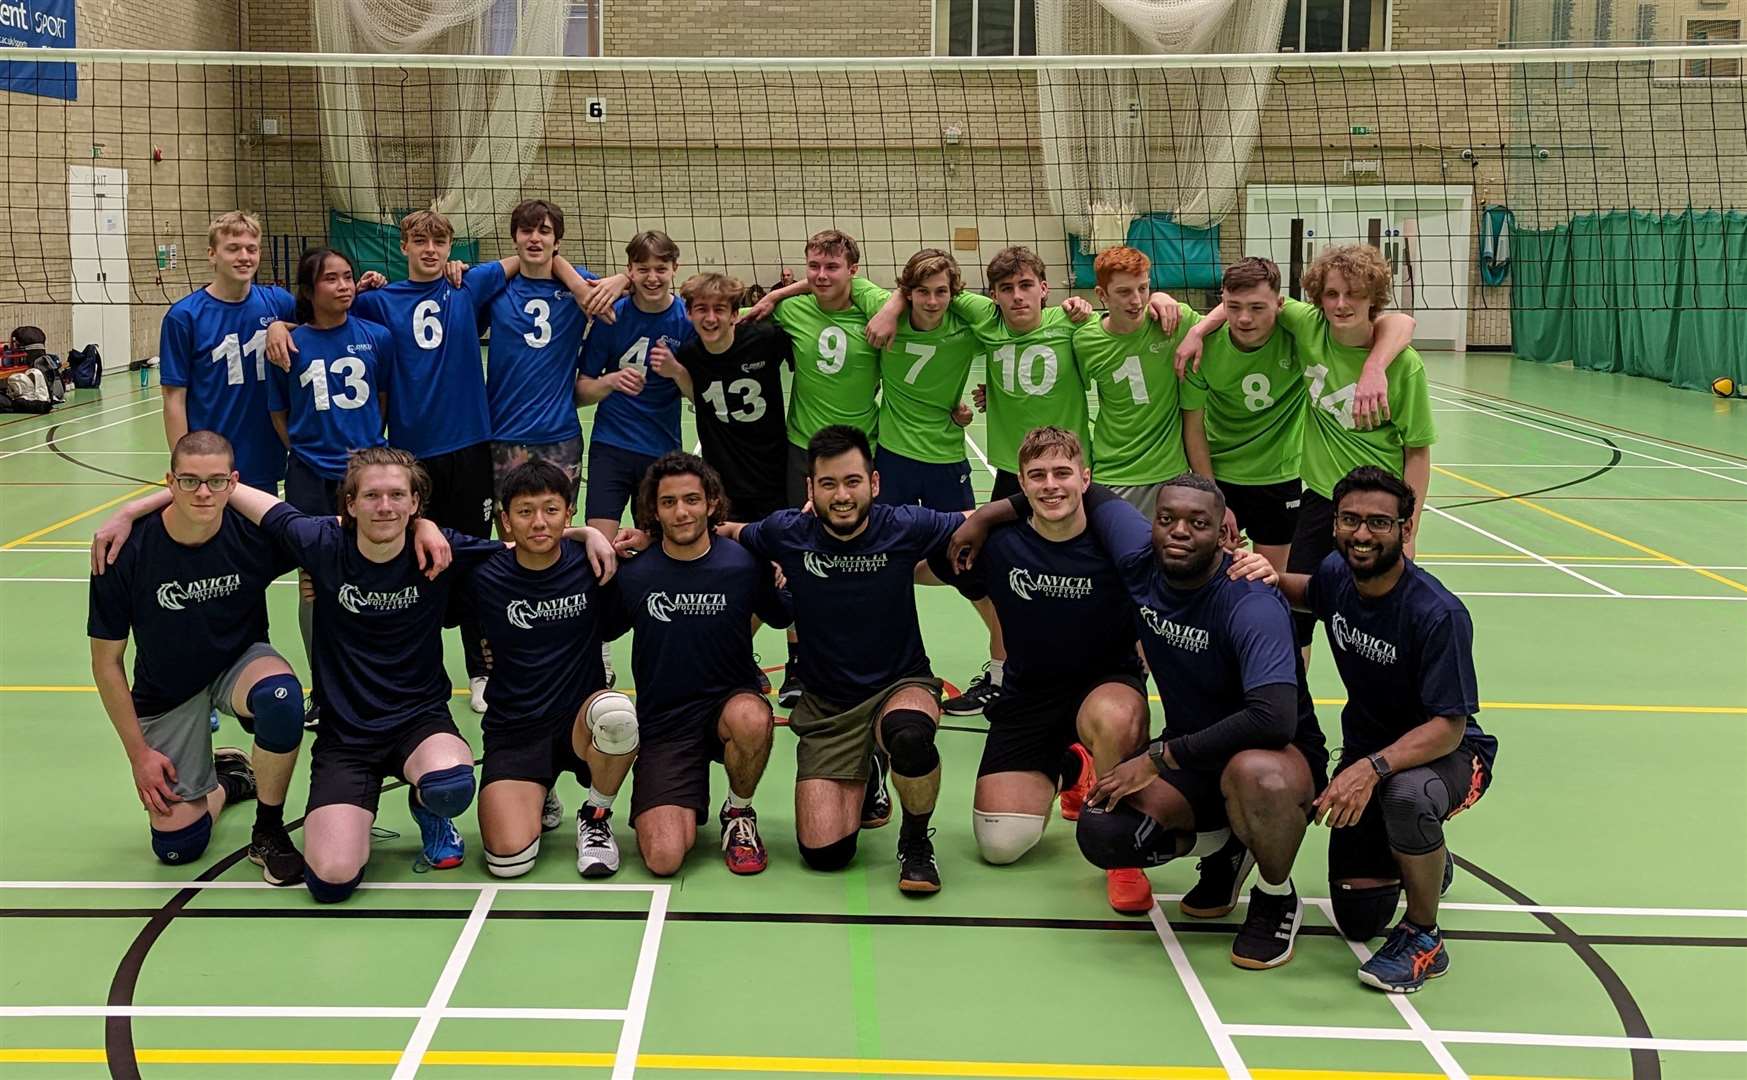 Kent Invicta Volleyball will compete in the National Volleyball League this season